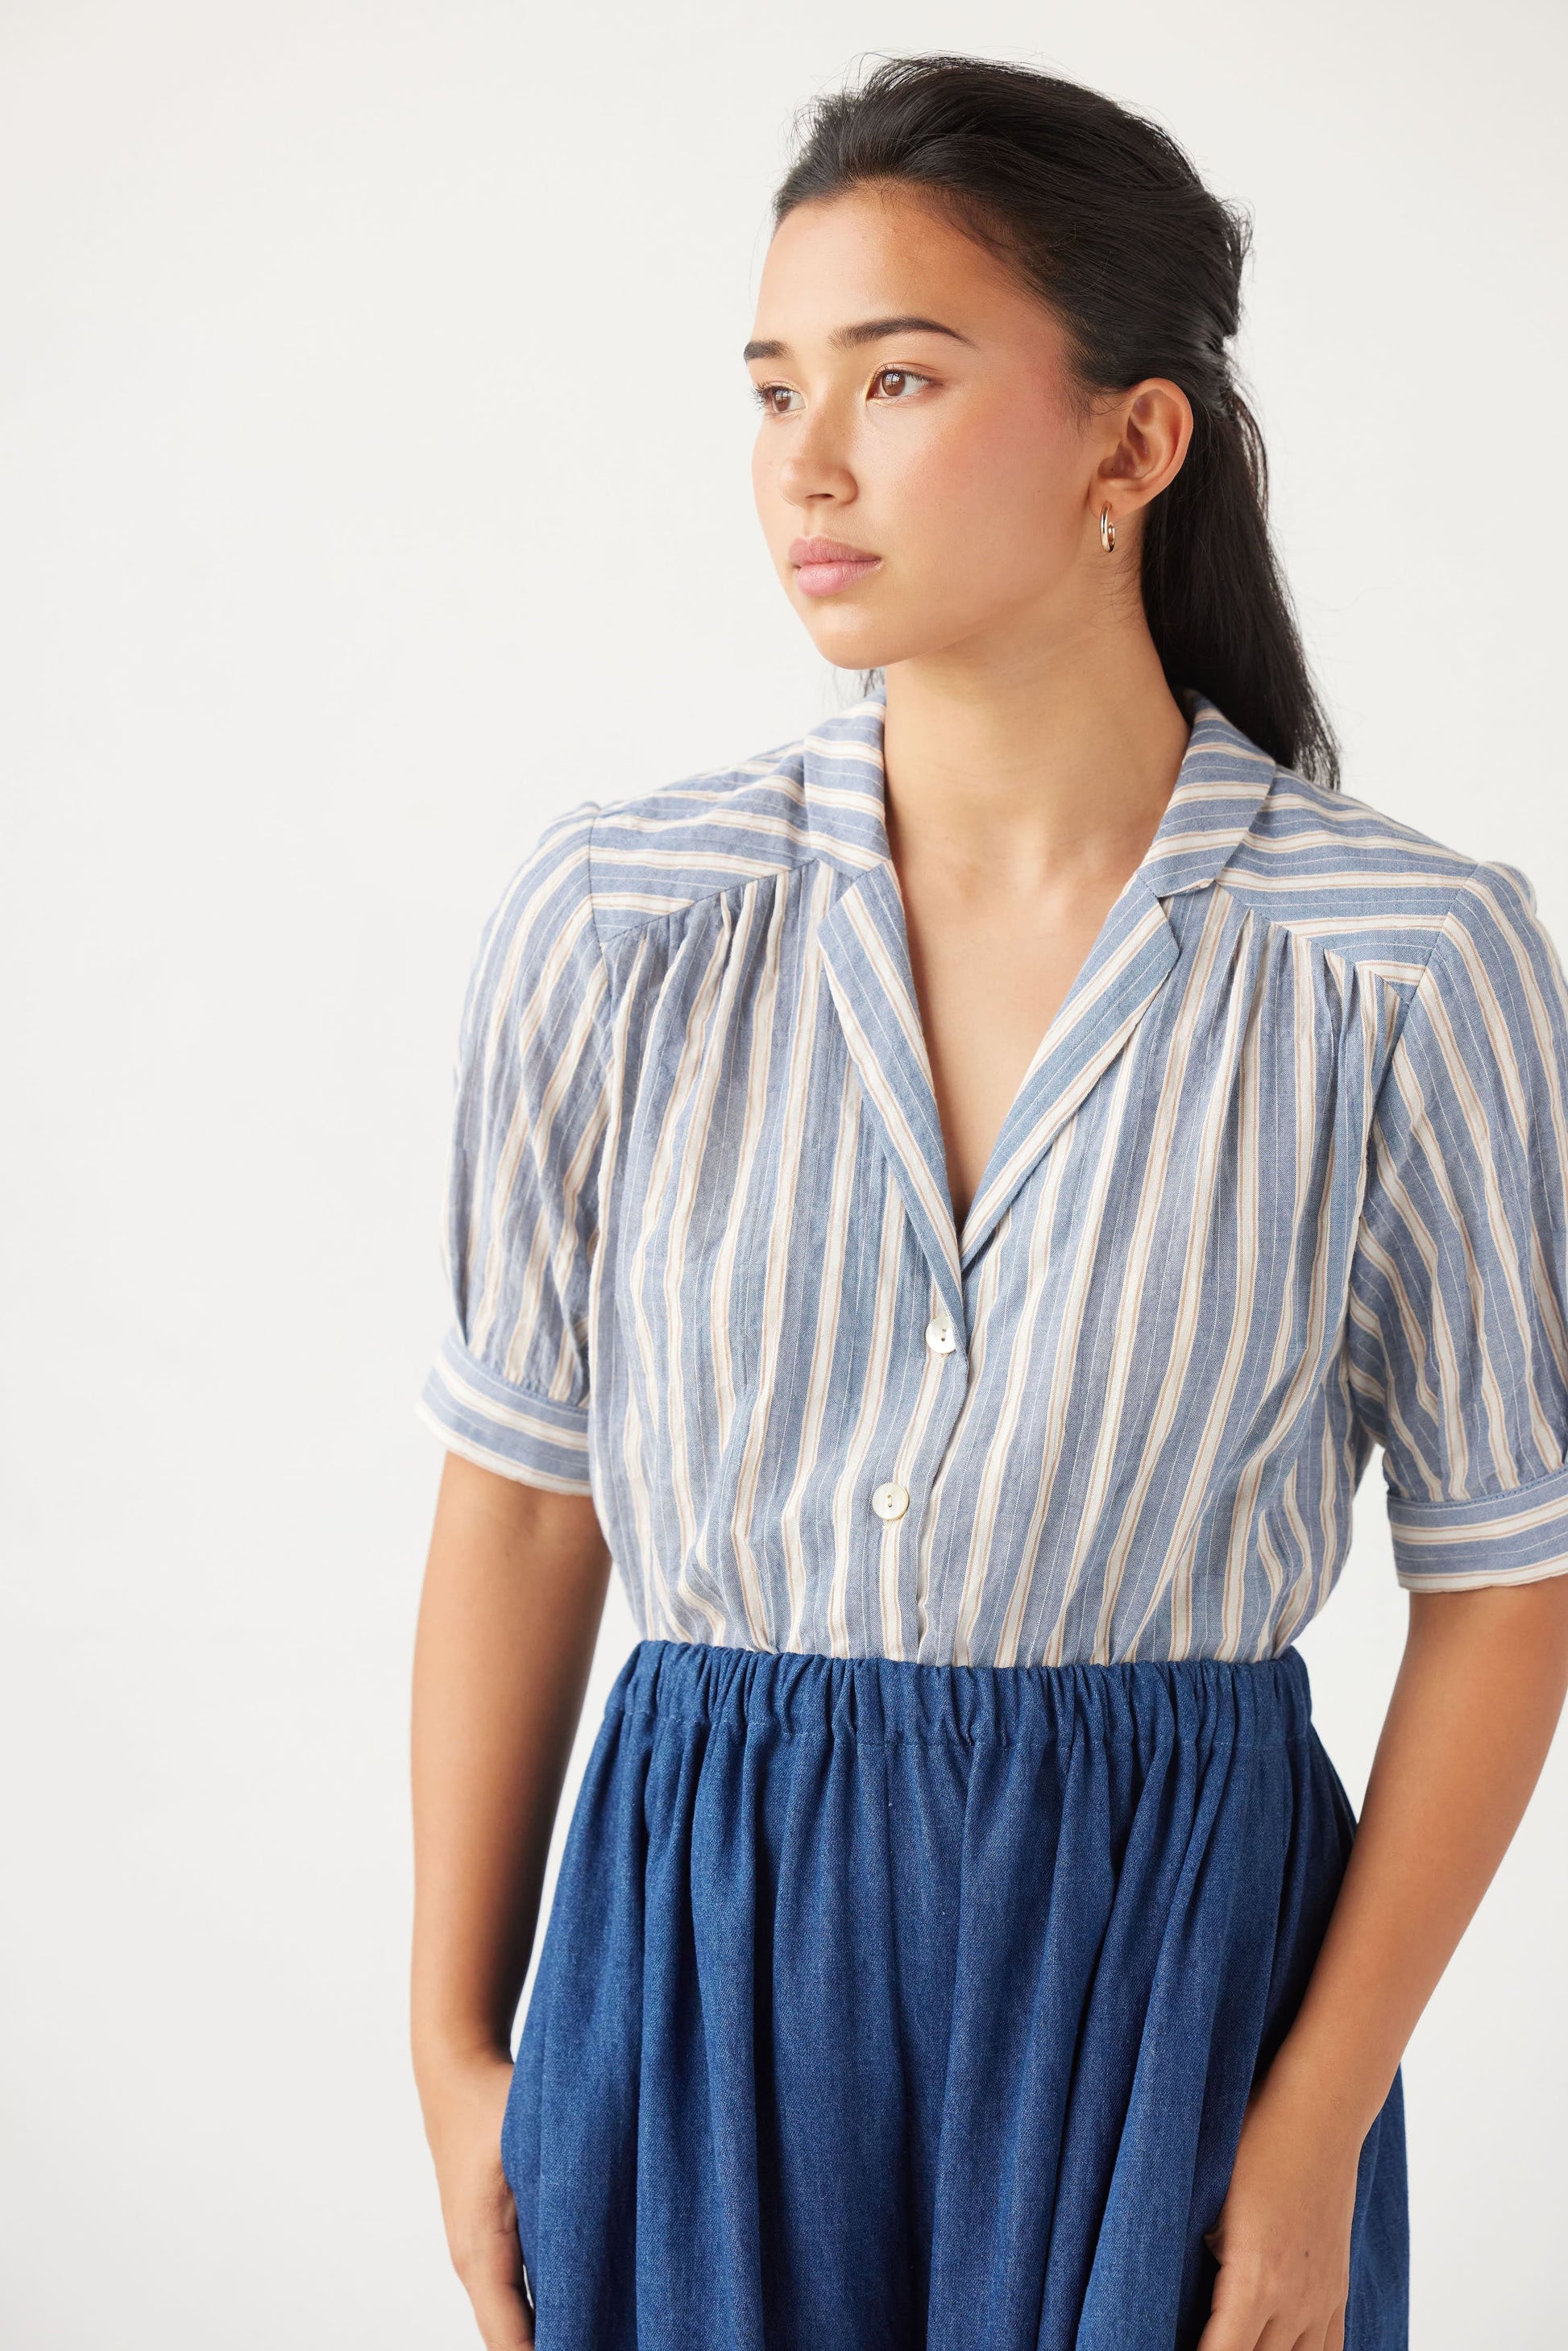 Katherine Blouse in Striped Cotton Tops CHRISTINE ALCALAY Blue Stripe Extra Small 